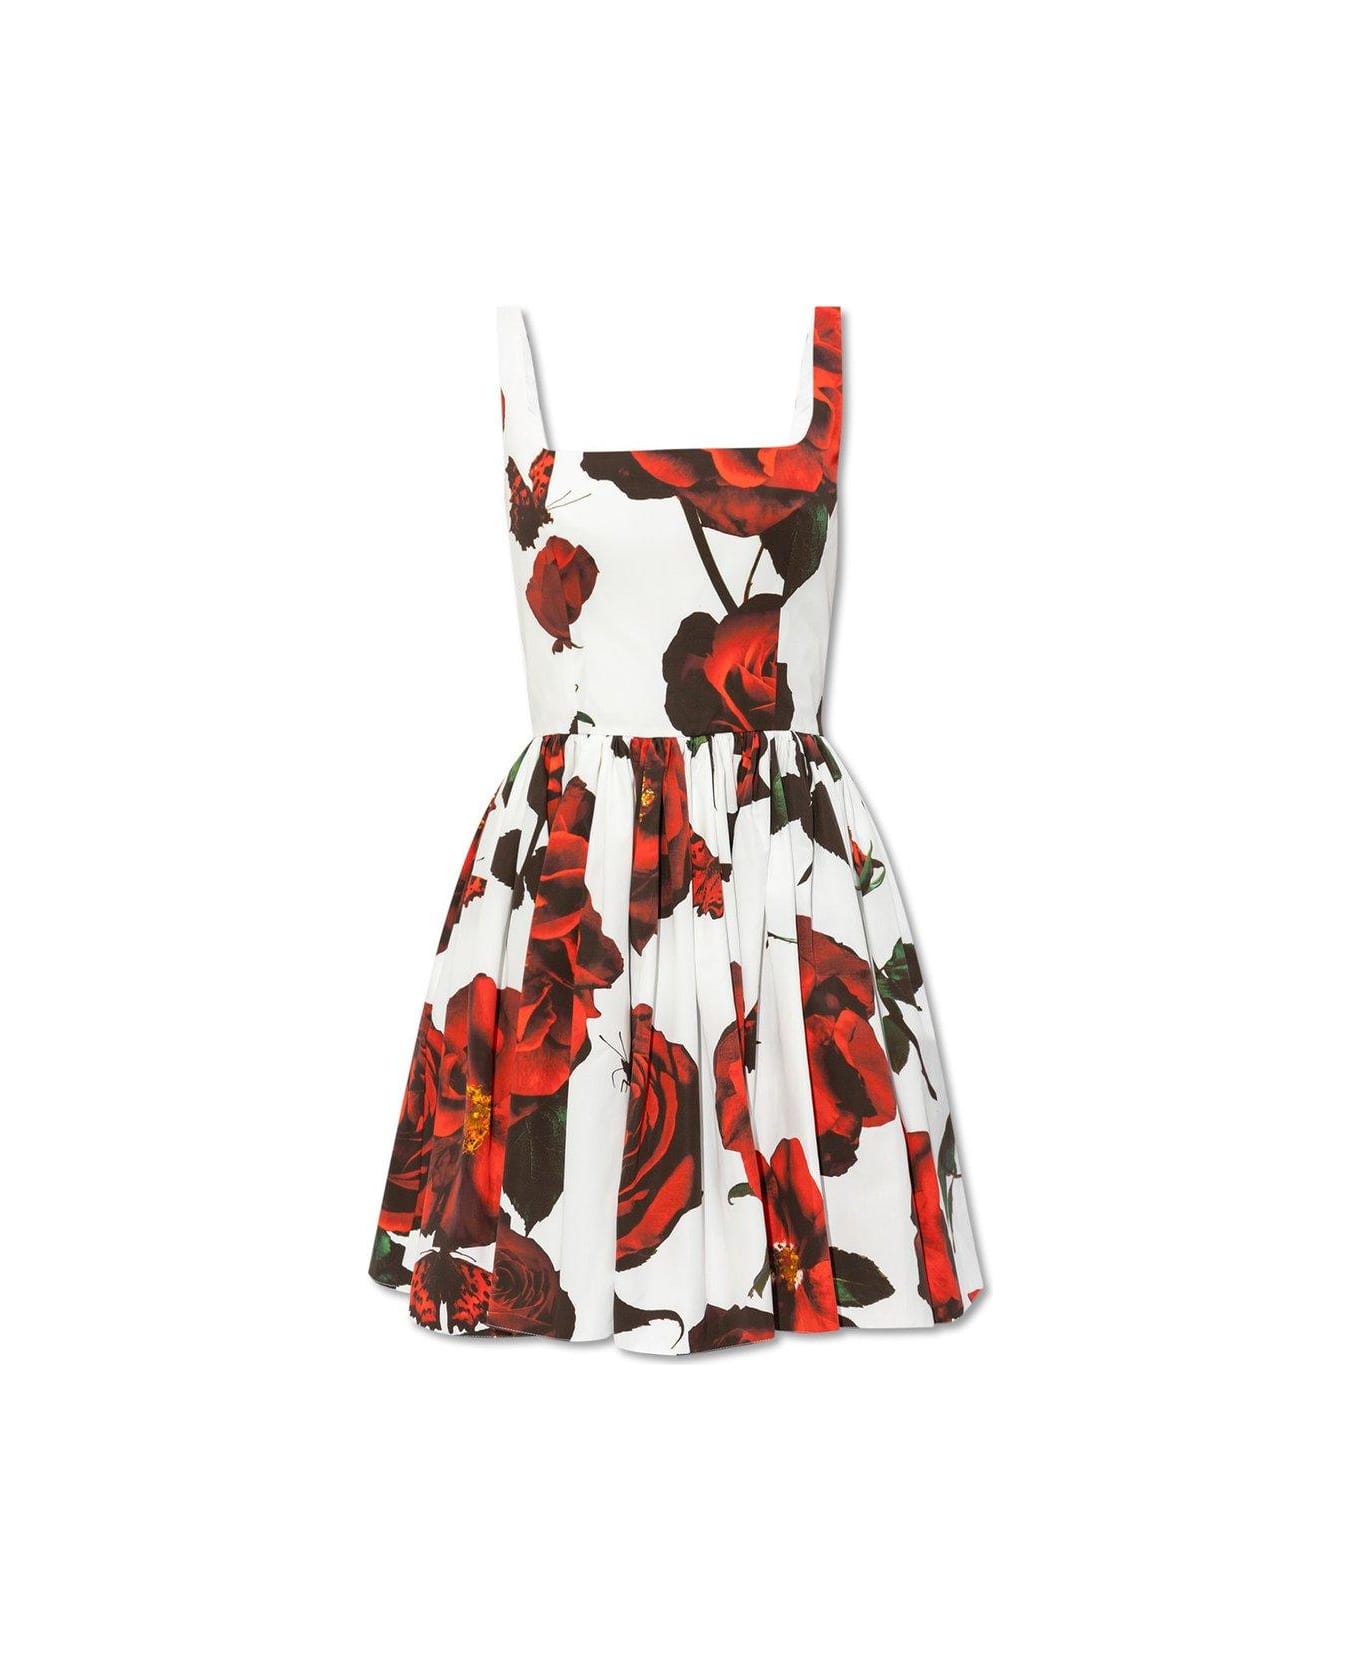 Alexander McQueen Floral Printed Square Neck Mini Dress - WHITE/RED